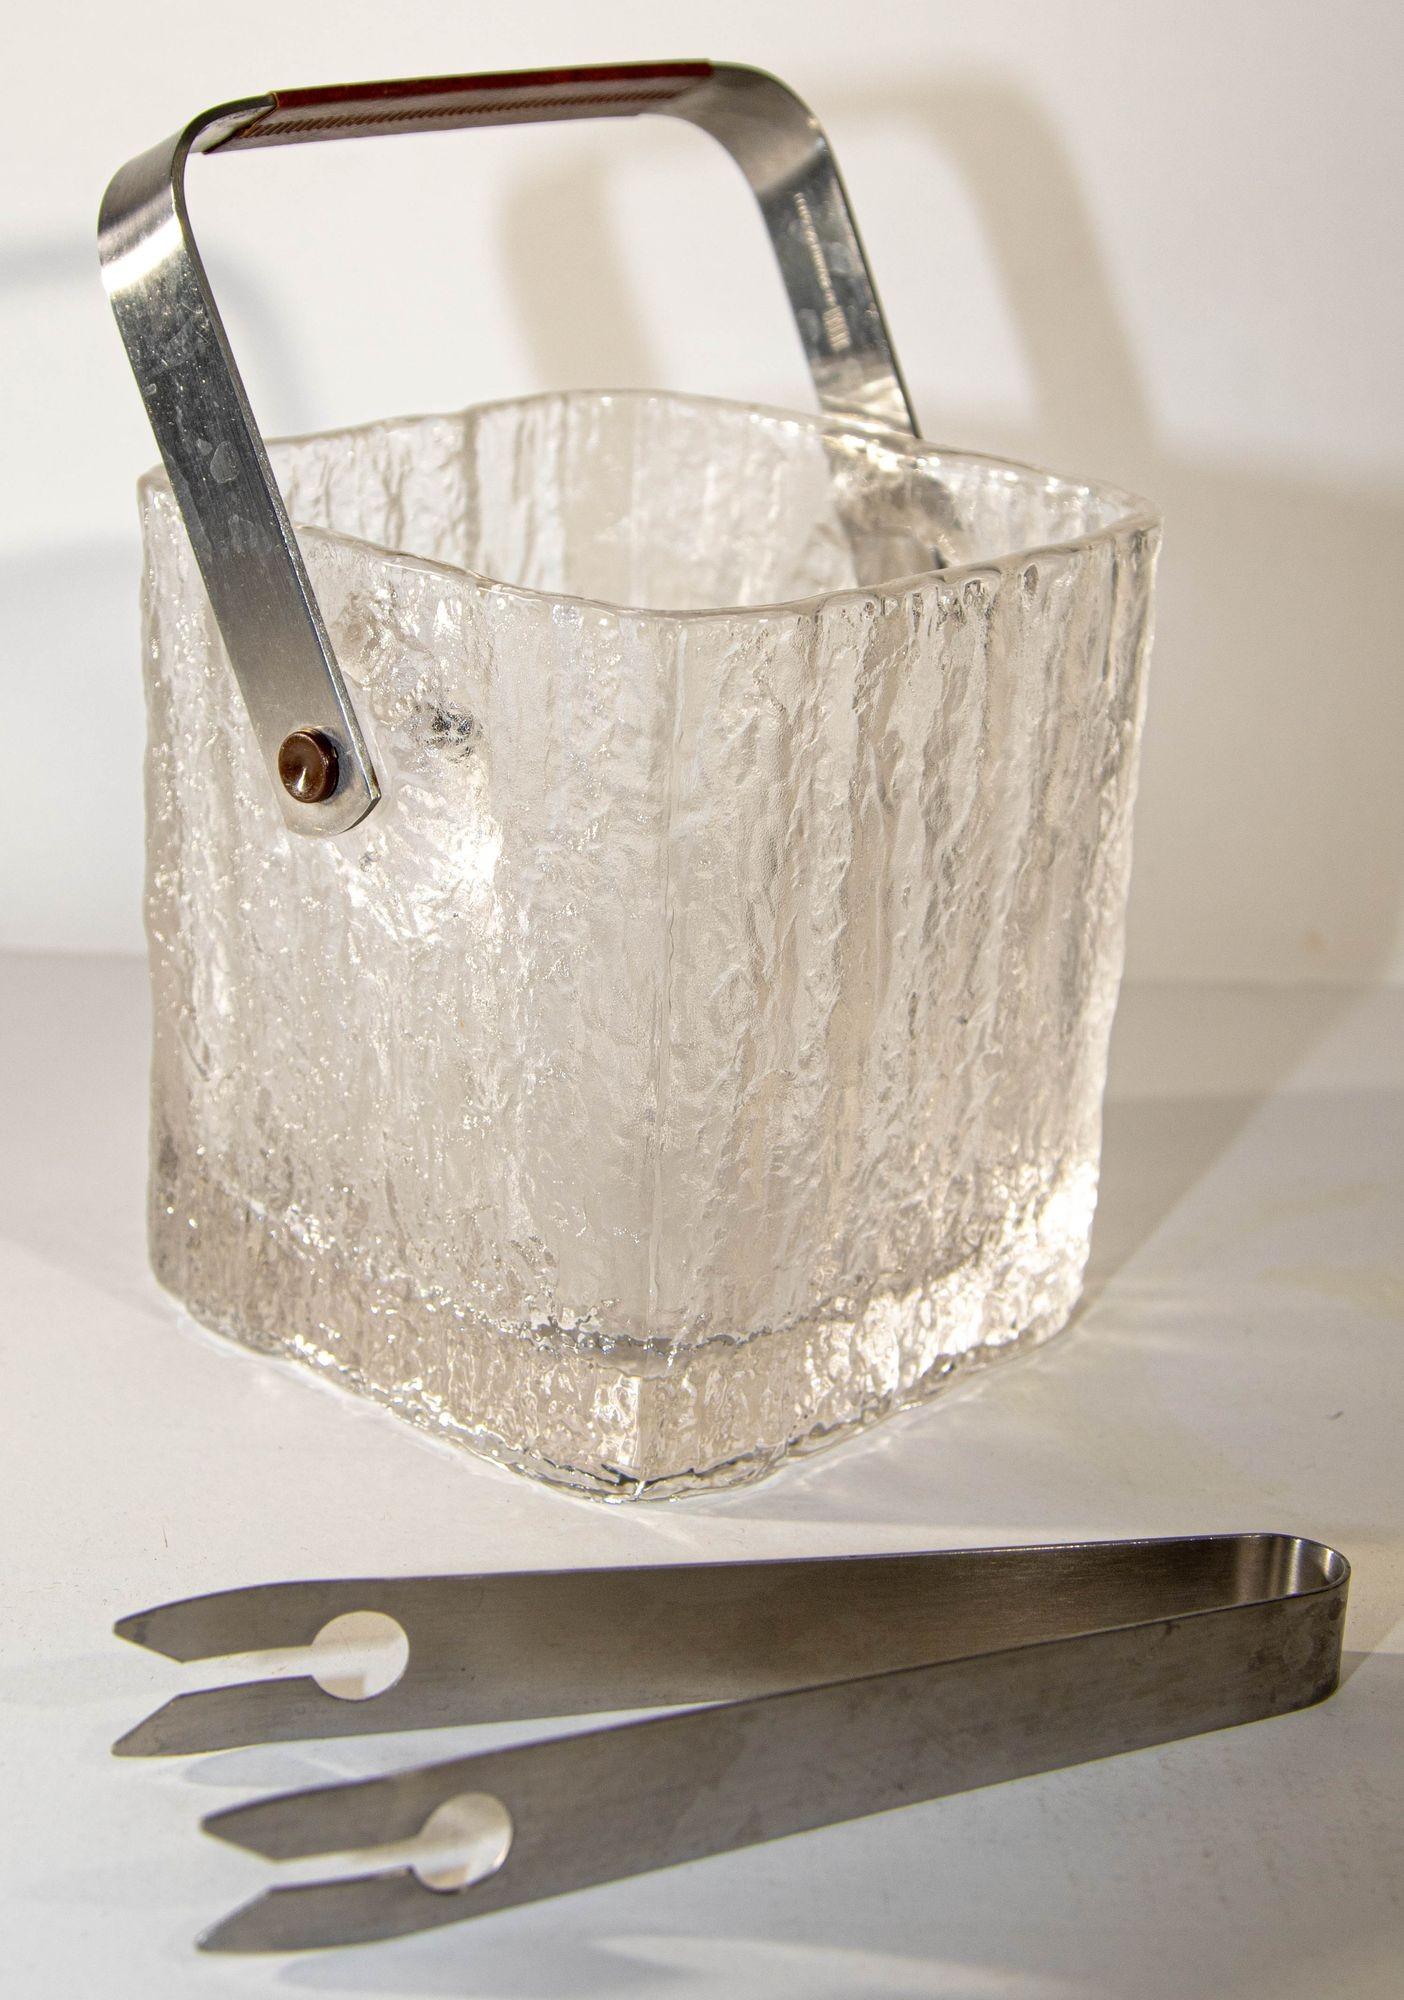 Vintage Mid-Century Modern Hoya Glacier Ice Bucket With Textured Ice Glass, Japan, Circa 1960s.
Produced in the 1960s by the Japanese brand, Hoya, the vintage Mid-Century Modern Japanese ice bucket has a heavy textured ice cube design features a